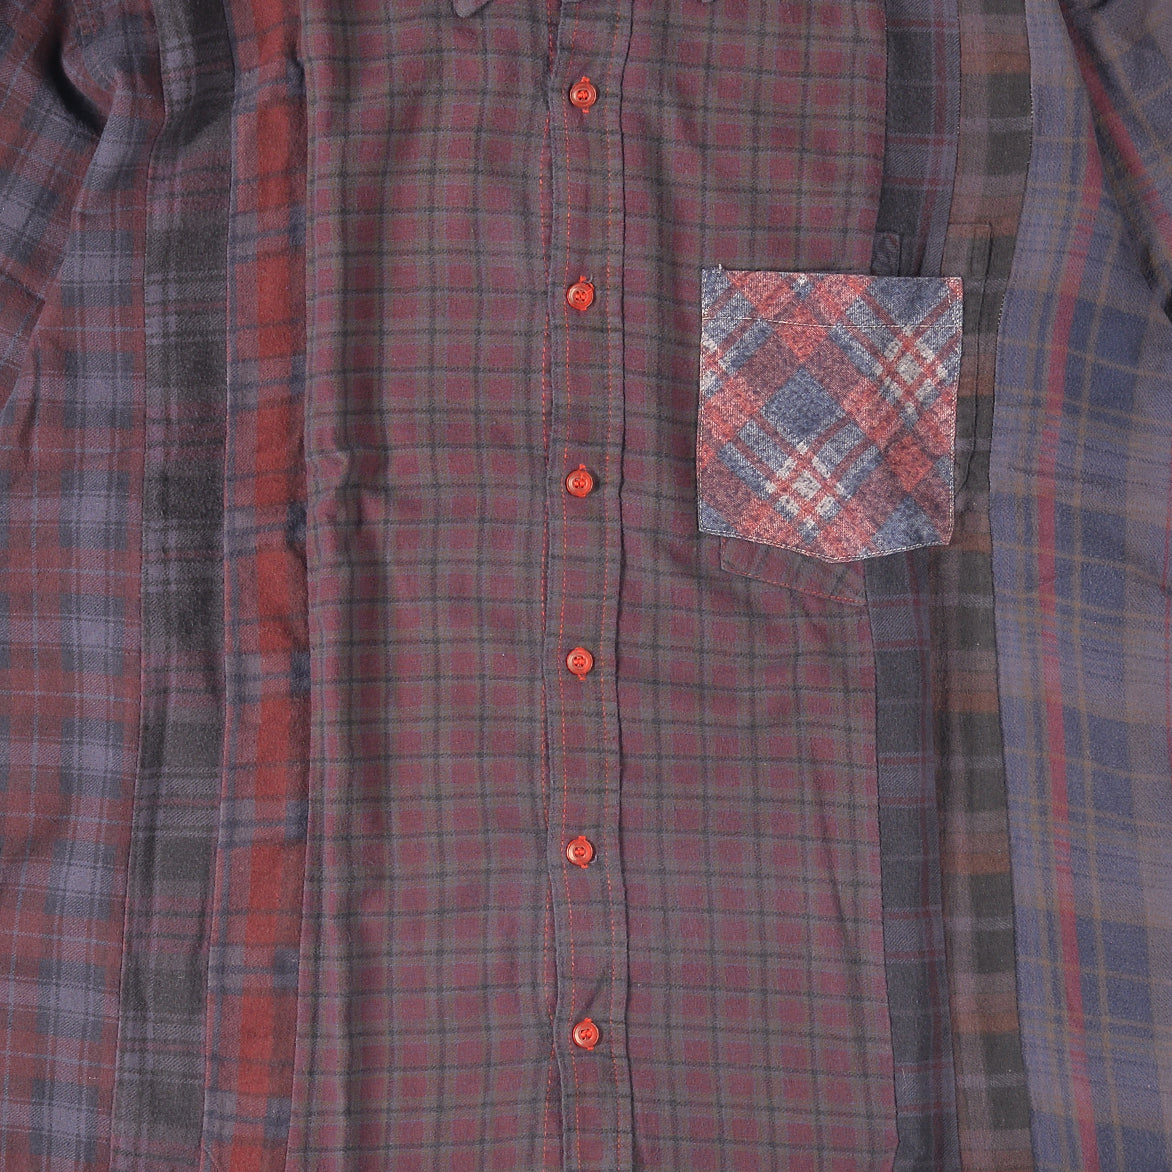 FLANNEL SHIRT -> 7 CUTS SHIRT / OVER DYE - LARGE